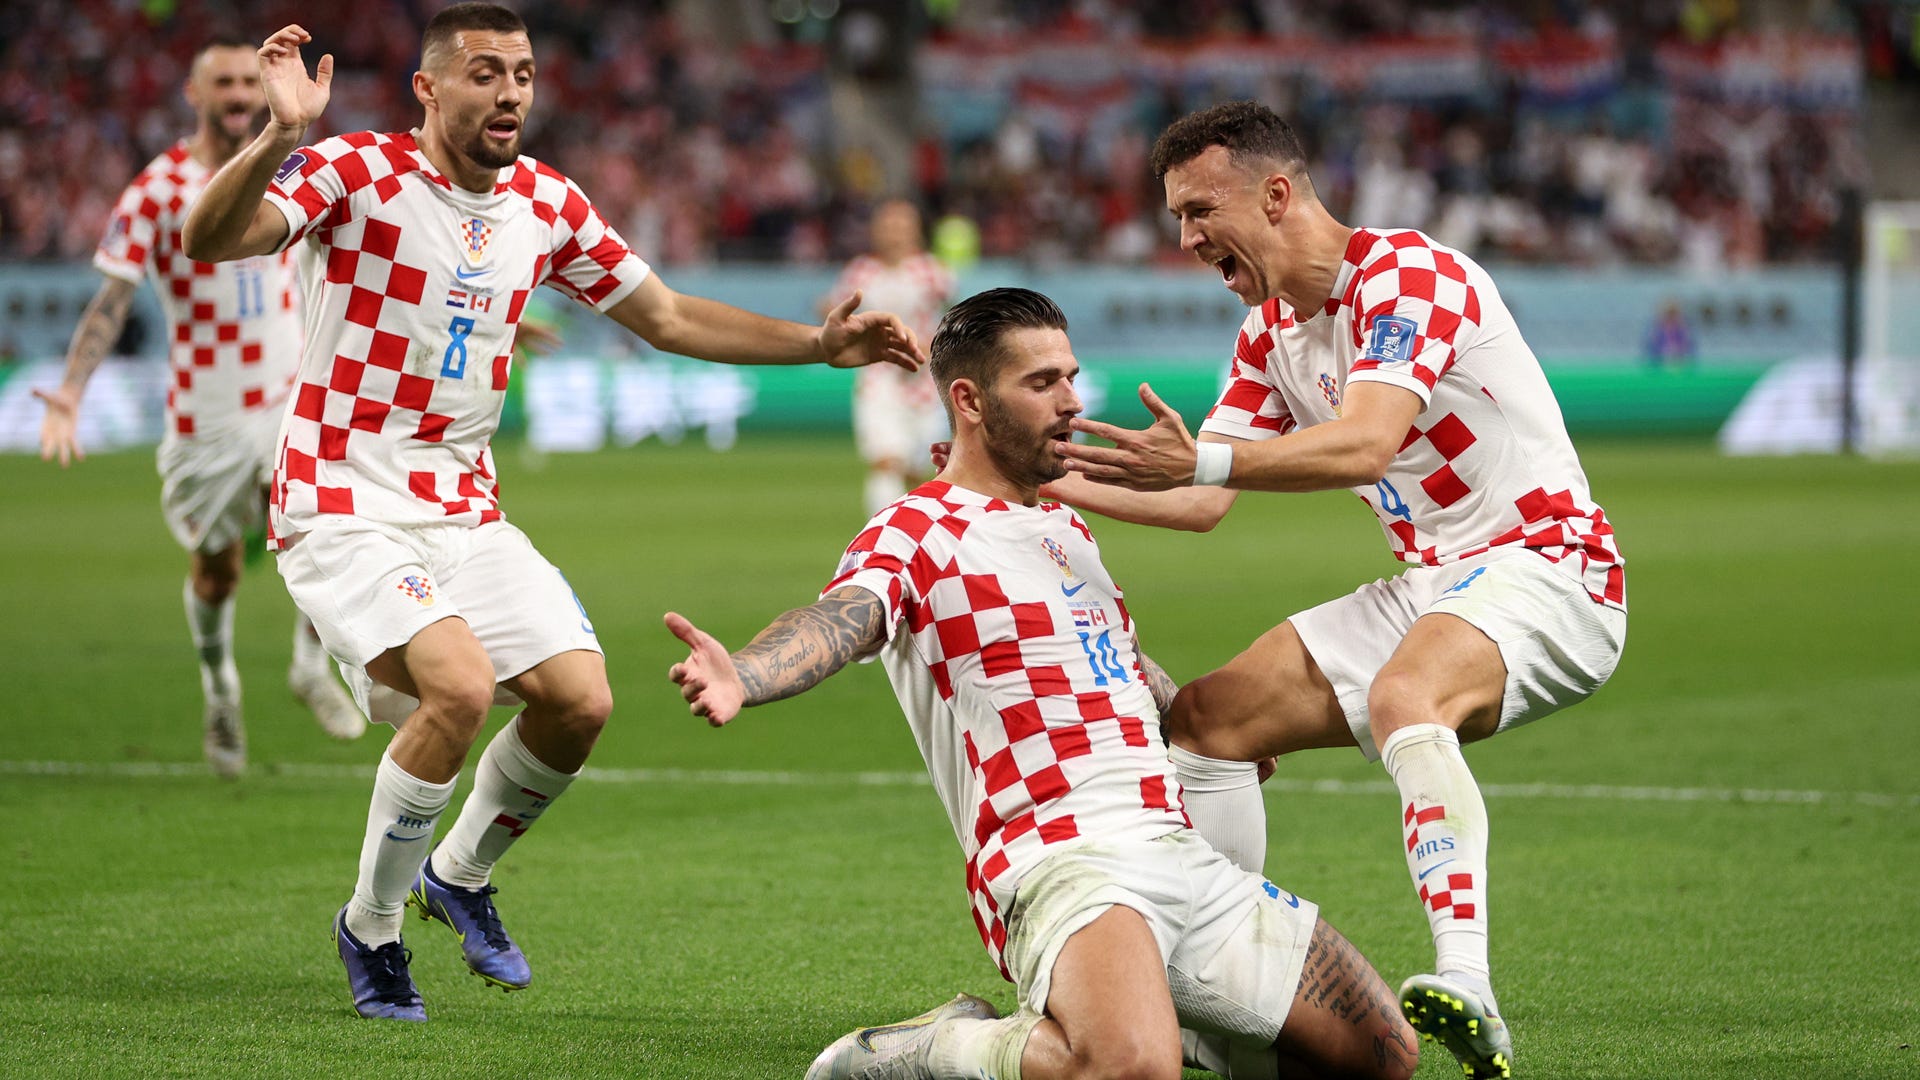 IN RECENT YEARS, CROATIA HAS EXERTED A SIGNIFICANT INFLUENCE AND SUCCESS ON THE INTERNATIONAL STAGE.